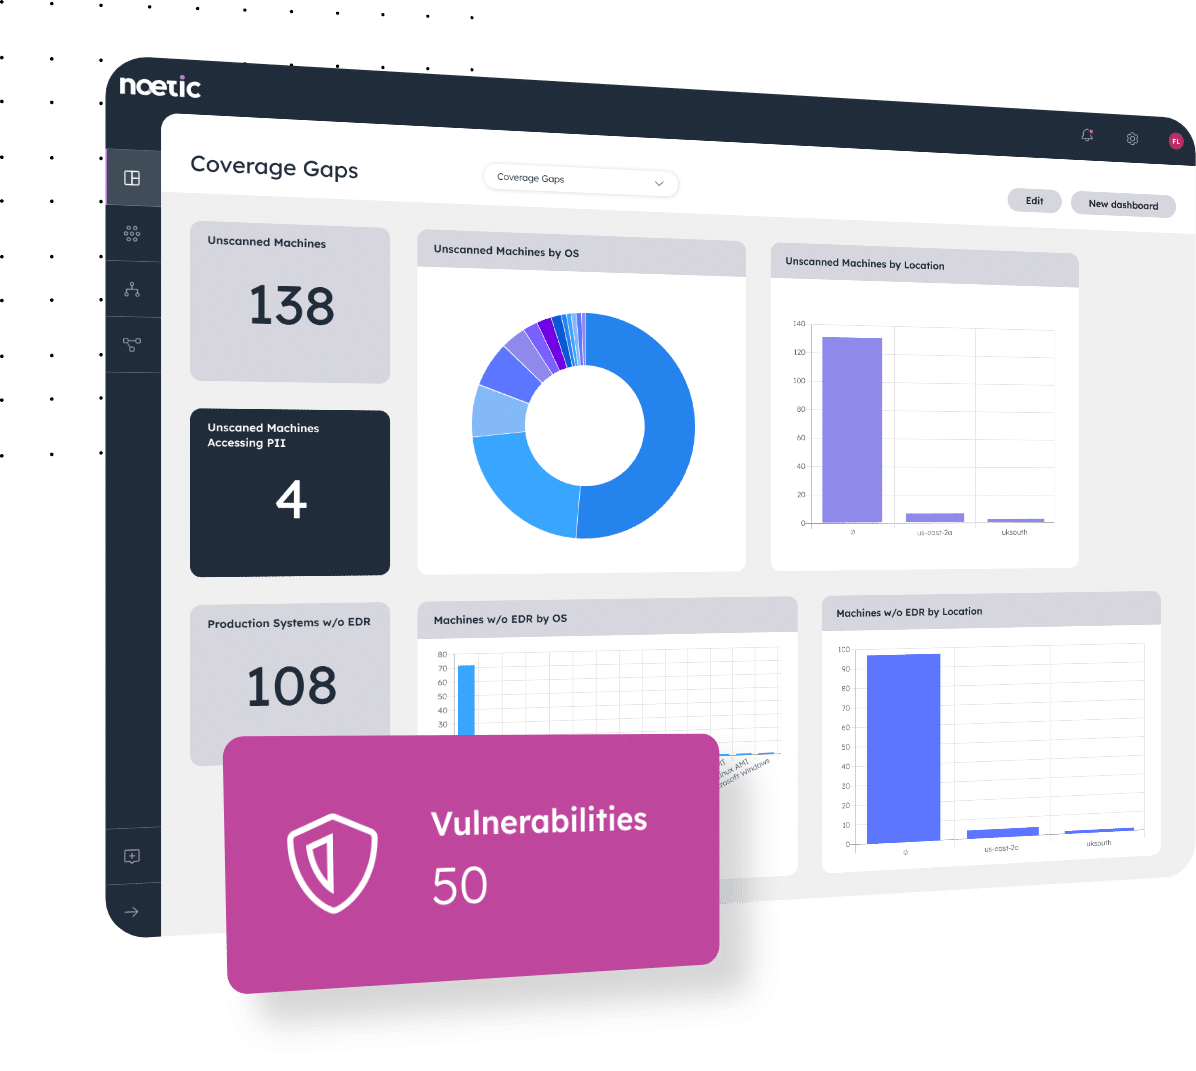 The dashboard of the Noetic Continuous Cyber Asset Management Platform